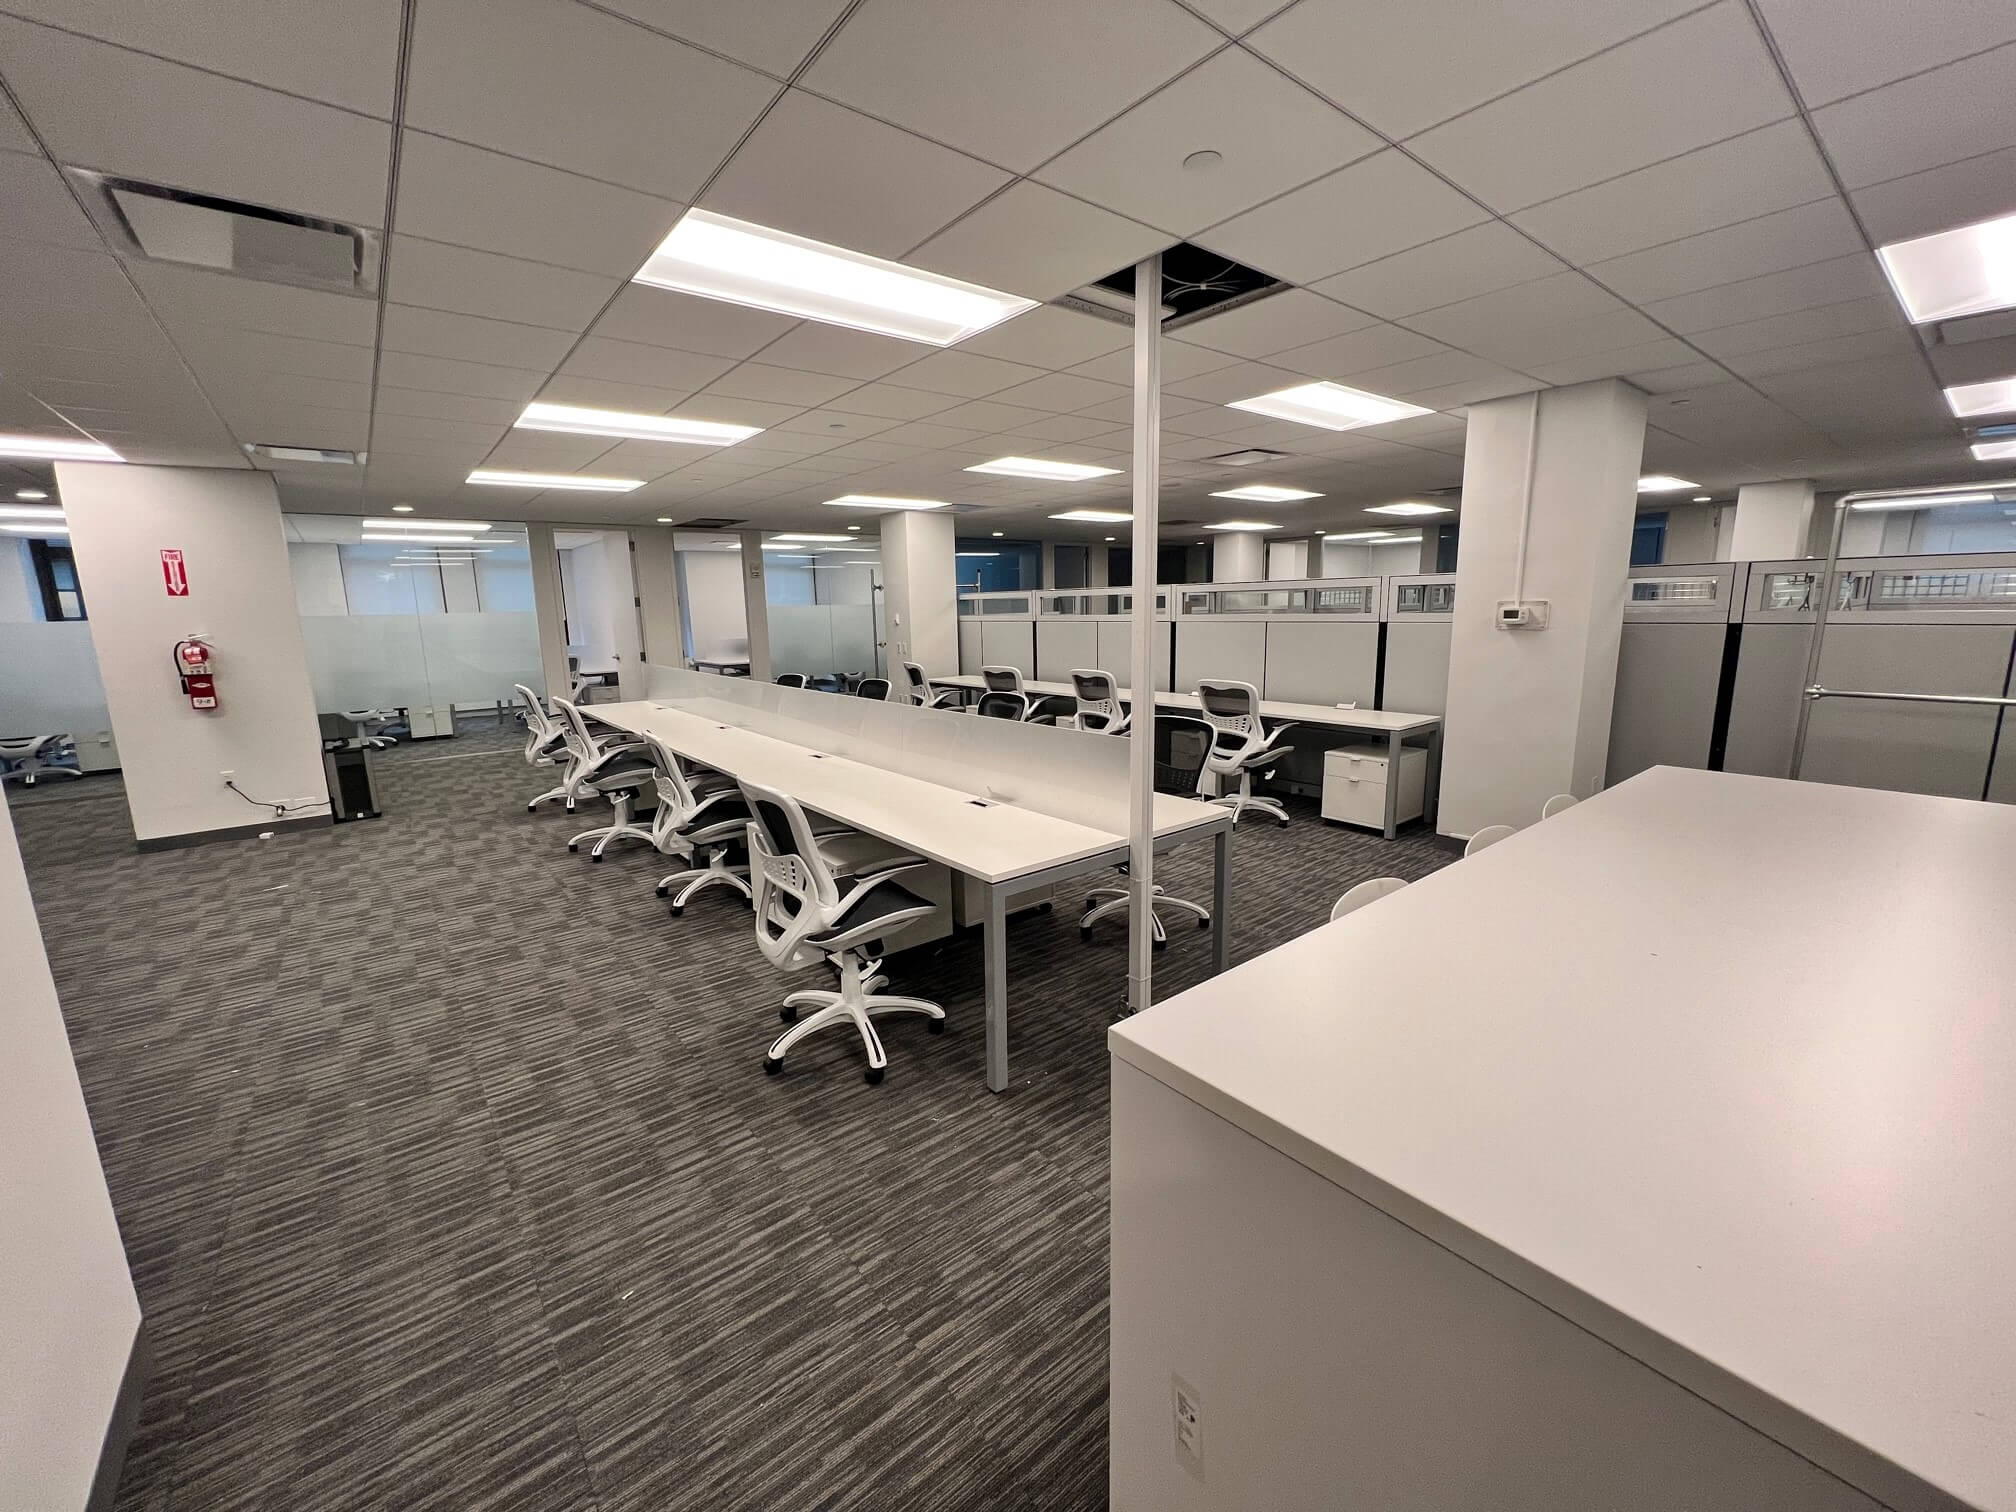 PTIOF, New Jersey’s top office furniture store, can provide in-office floor planning free of charge and will subsequently work with you throughout the entire buying process. No matter the style you are looking for we have furniture that will fit your needs in New Jersey.